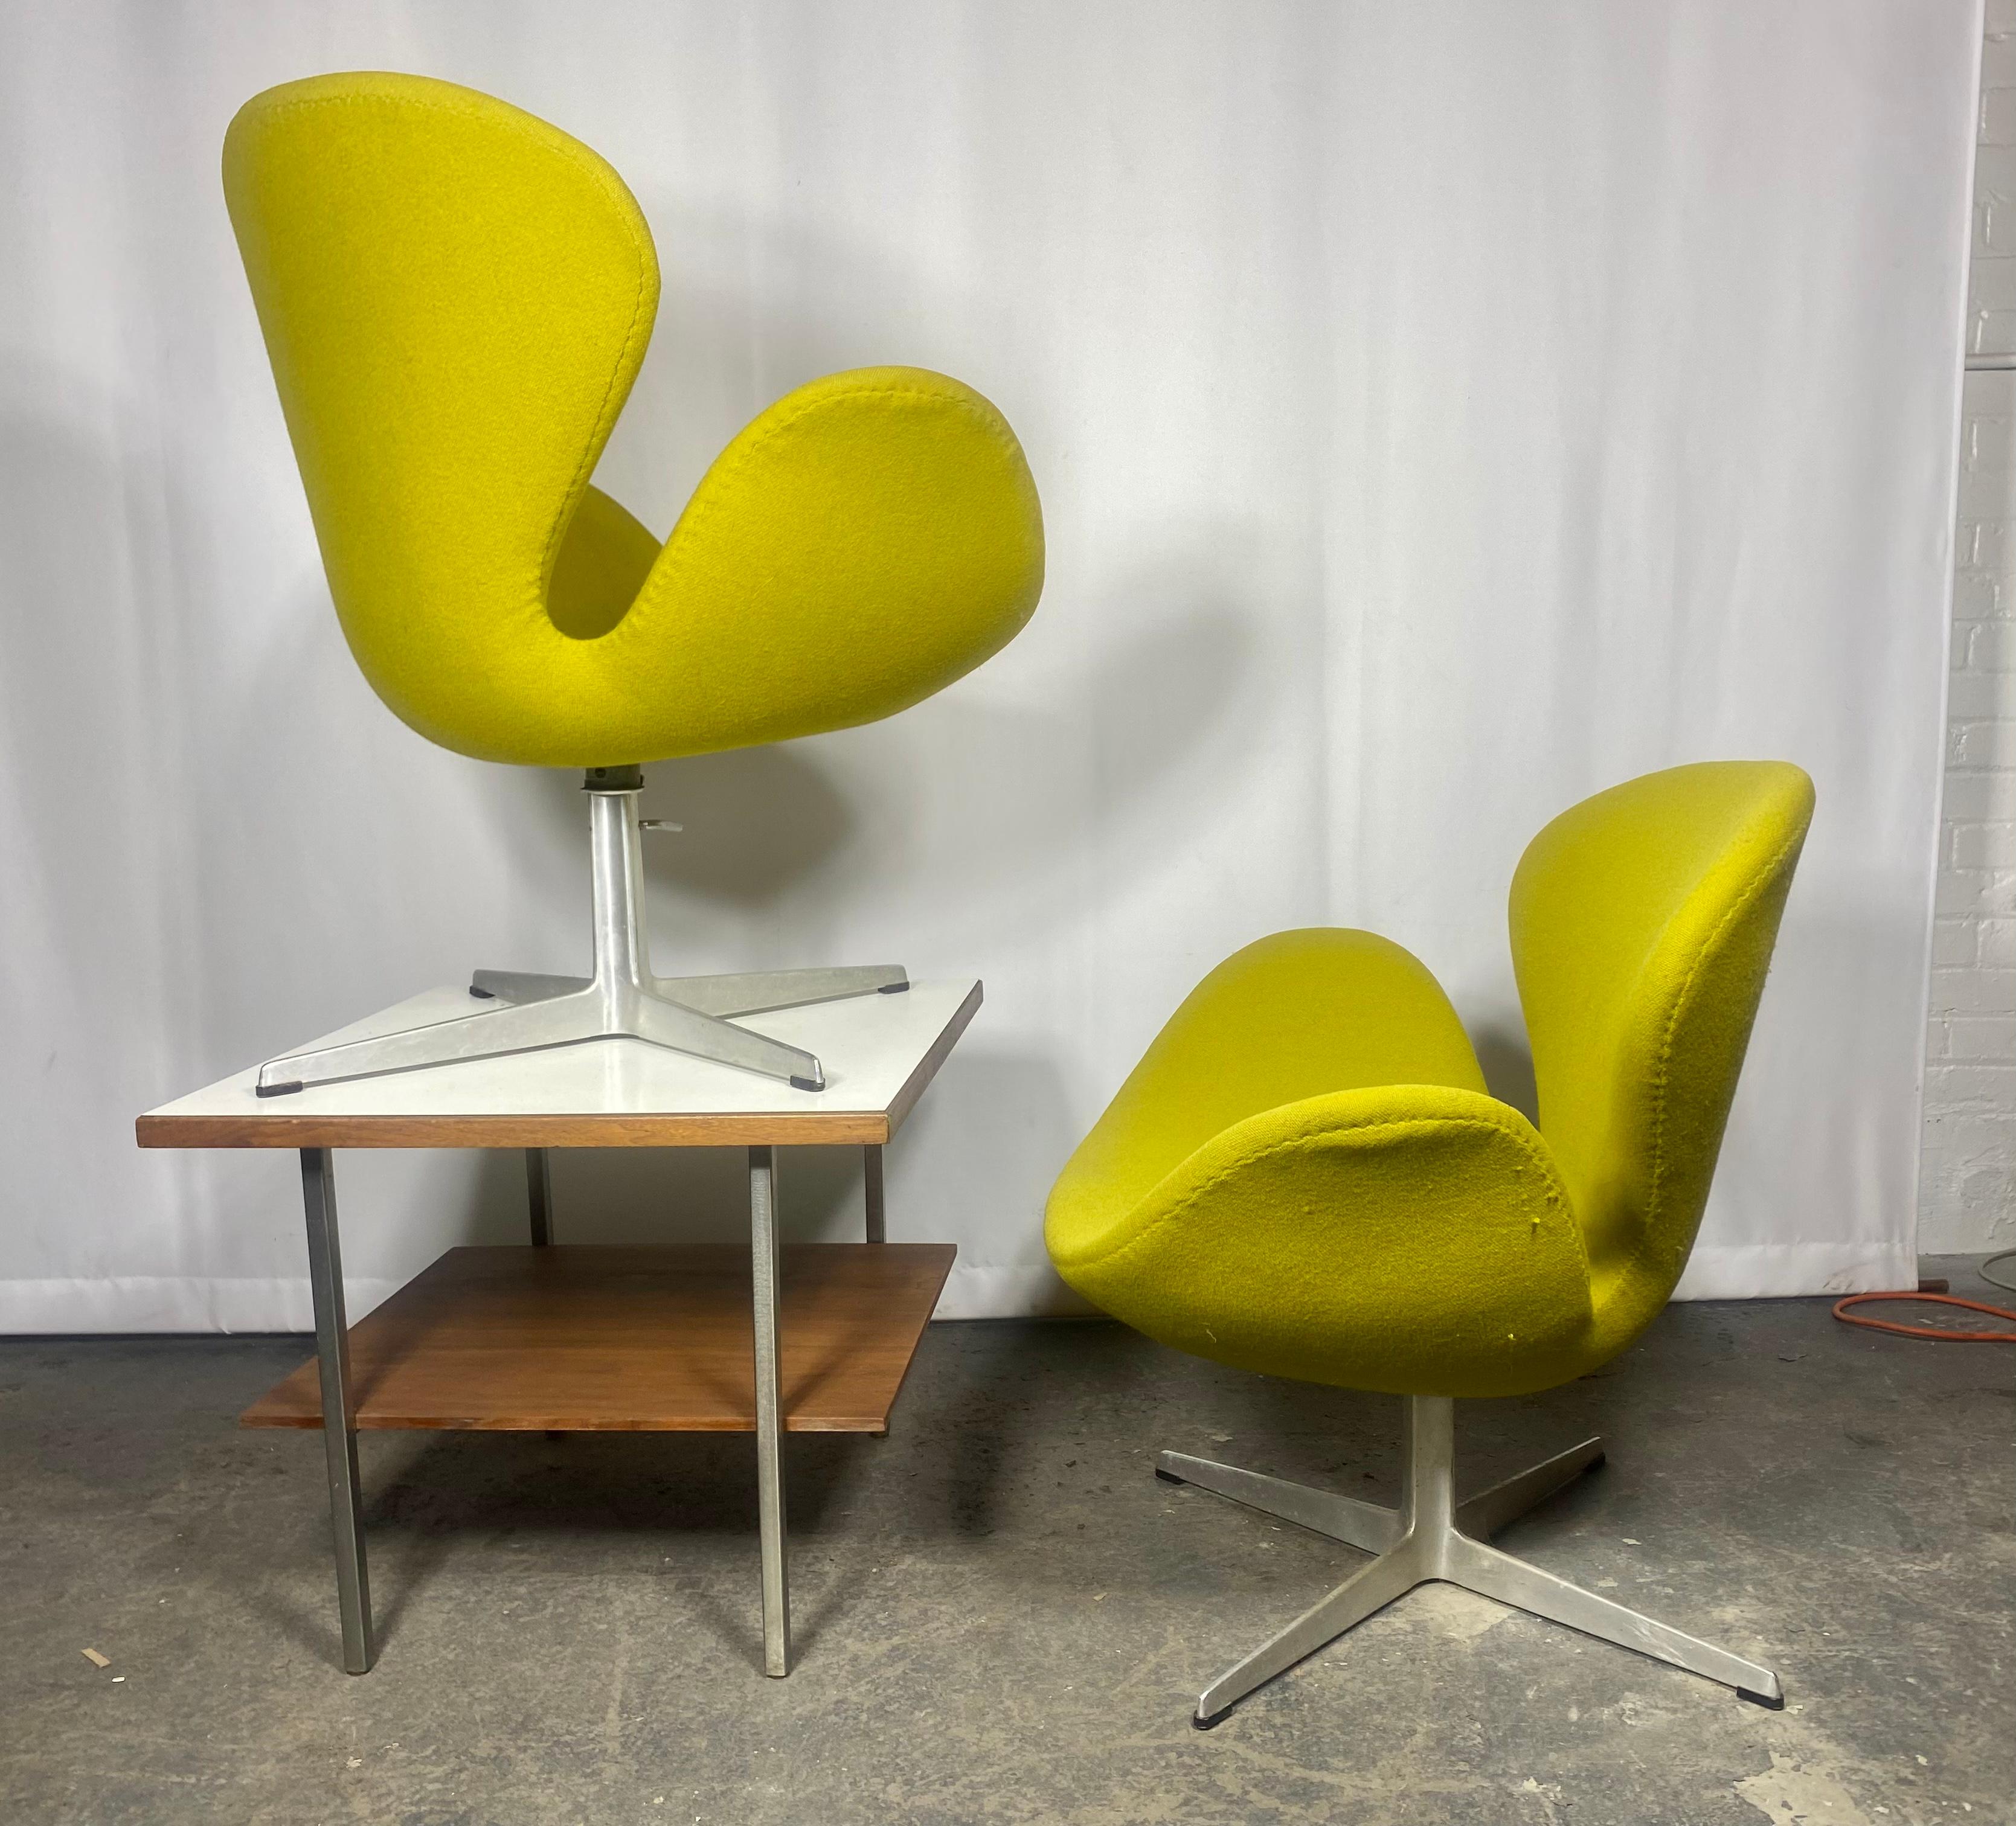 Classic Mid Century Modern Swan Chairs, Arne Jacobsen/Fritzhansen , Denmark 1968 In Good Condition For Sale In Buffalo, NY